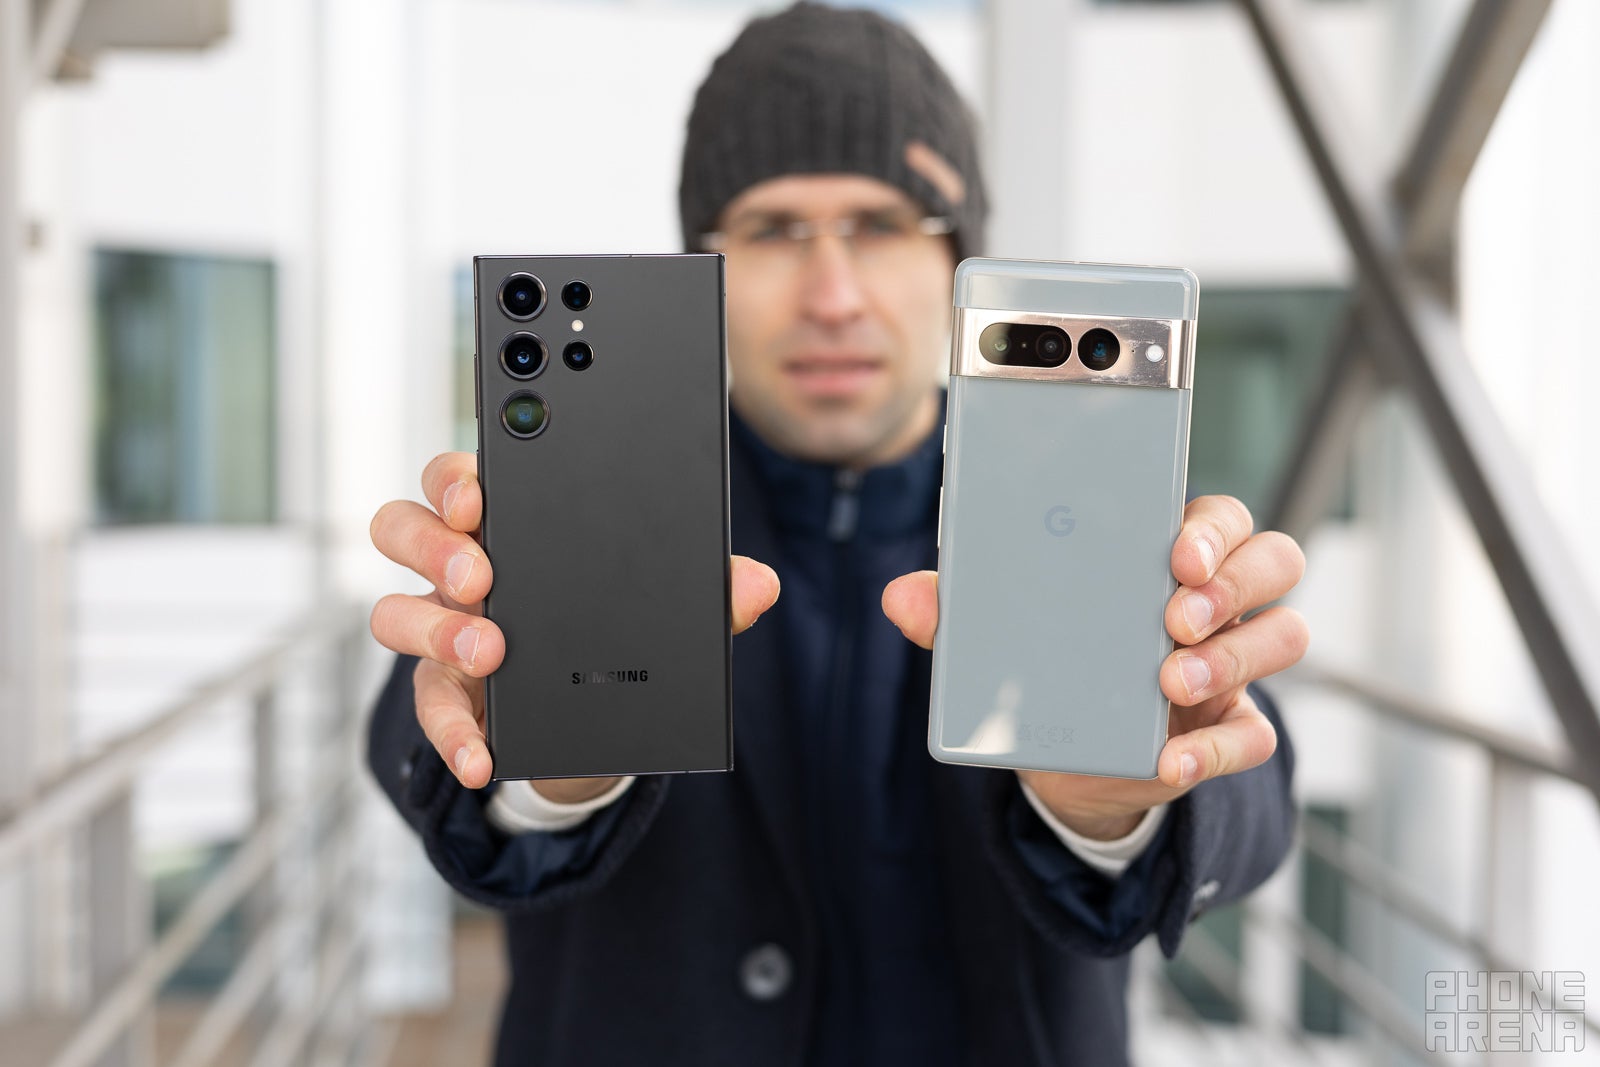 (Image Credit - PhoneArena) S23 Ultra on the left, Pixel 7 Pro on the right - Samsung Galaxy S23 Ultra vs Google Pixel 7 Pro: the battle of Androids